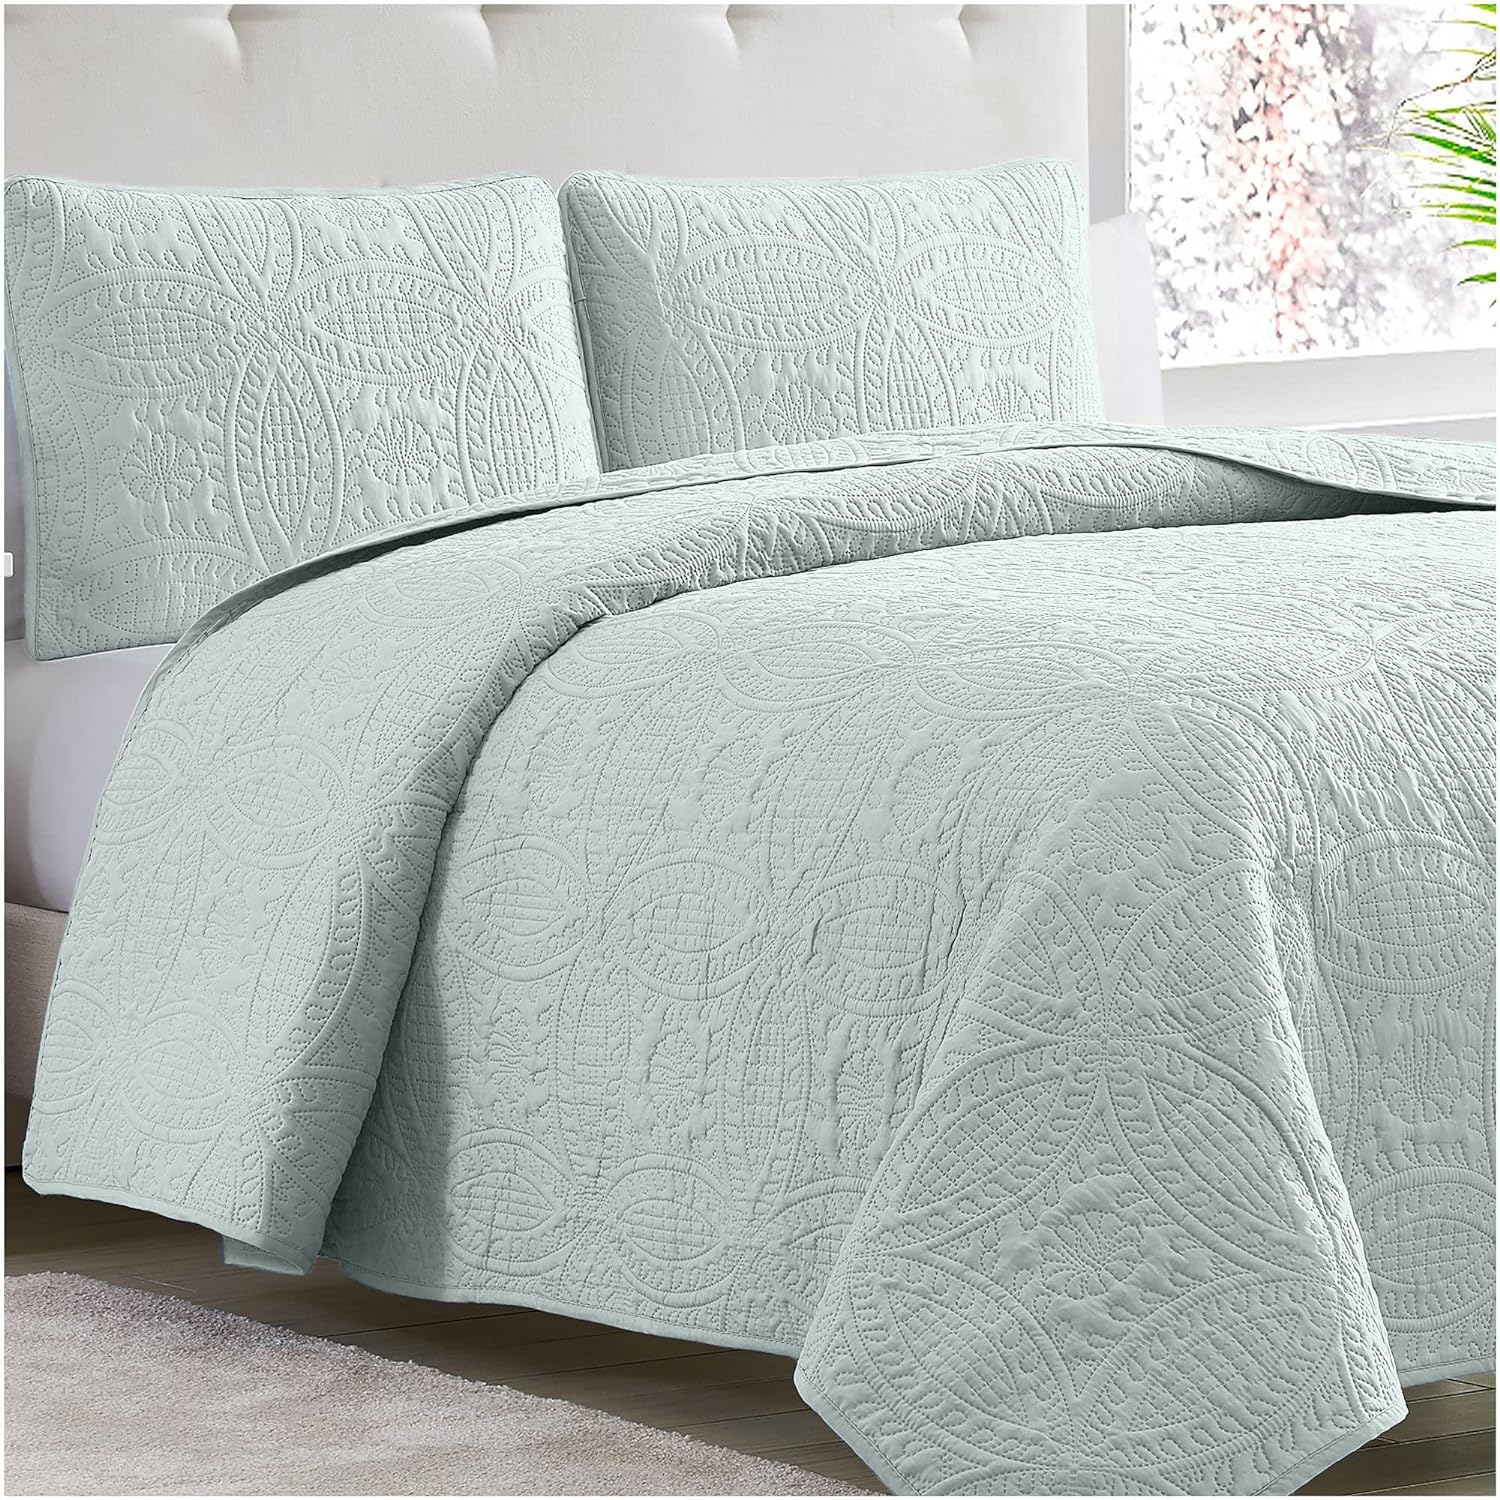 Mellanni Full/Queen Size Bedspread Coverlet Set - Bedding Cover with Shams - Ultrasonic Quilting Technology - 3 Piece Oversized Quilt Set - Bedspreads & Coverlets (Full/Queen, Spa Mint) 